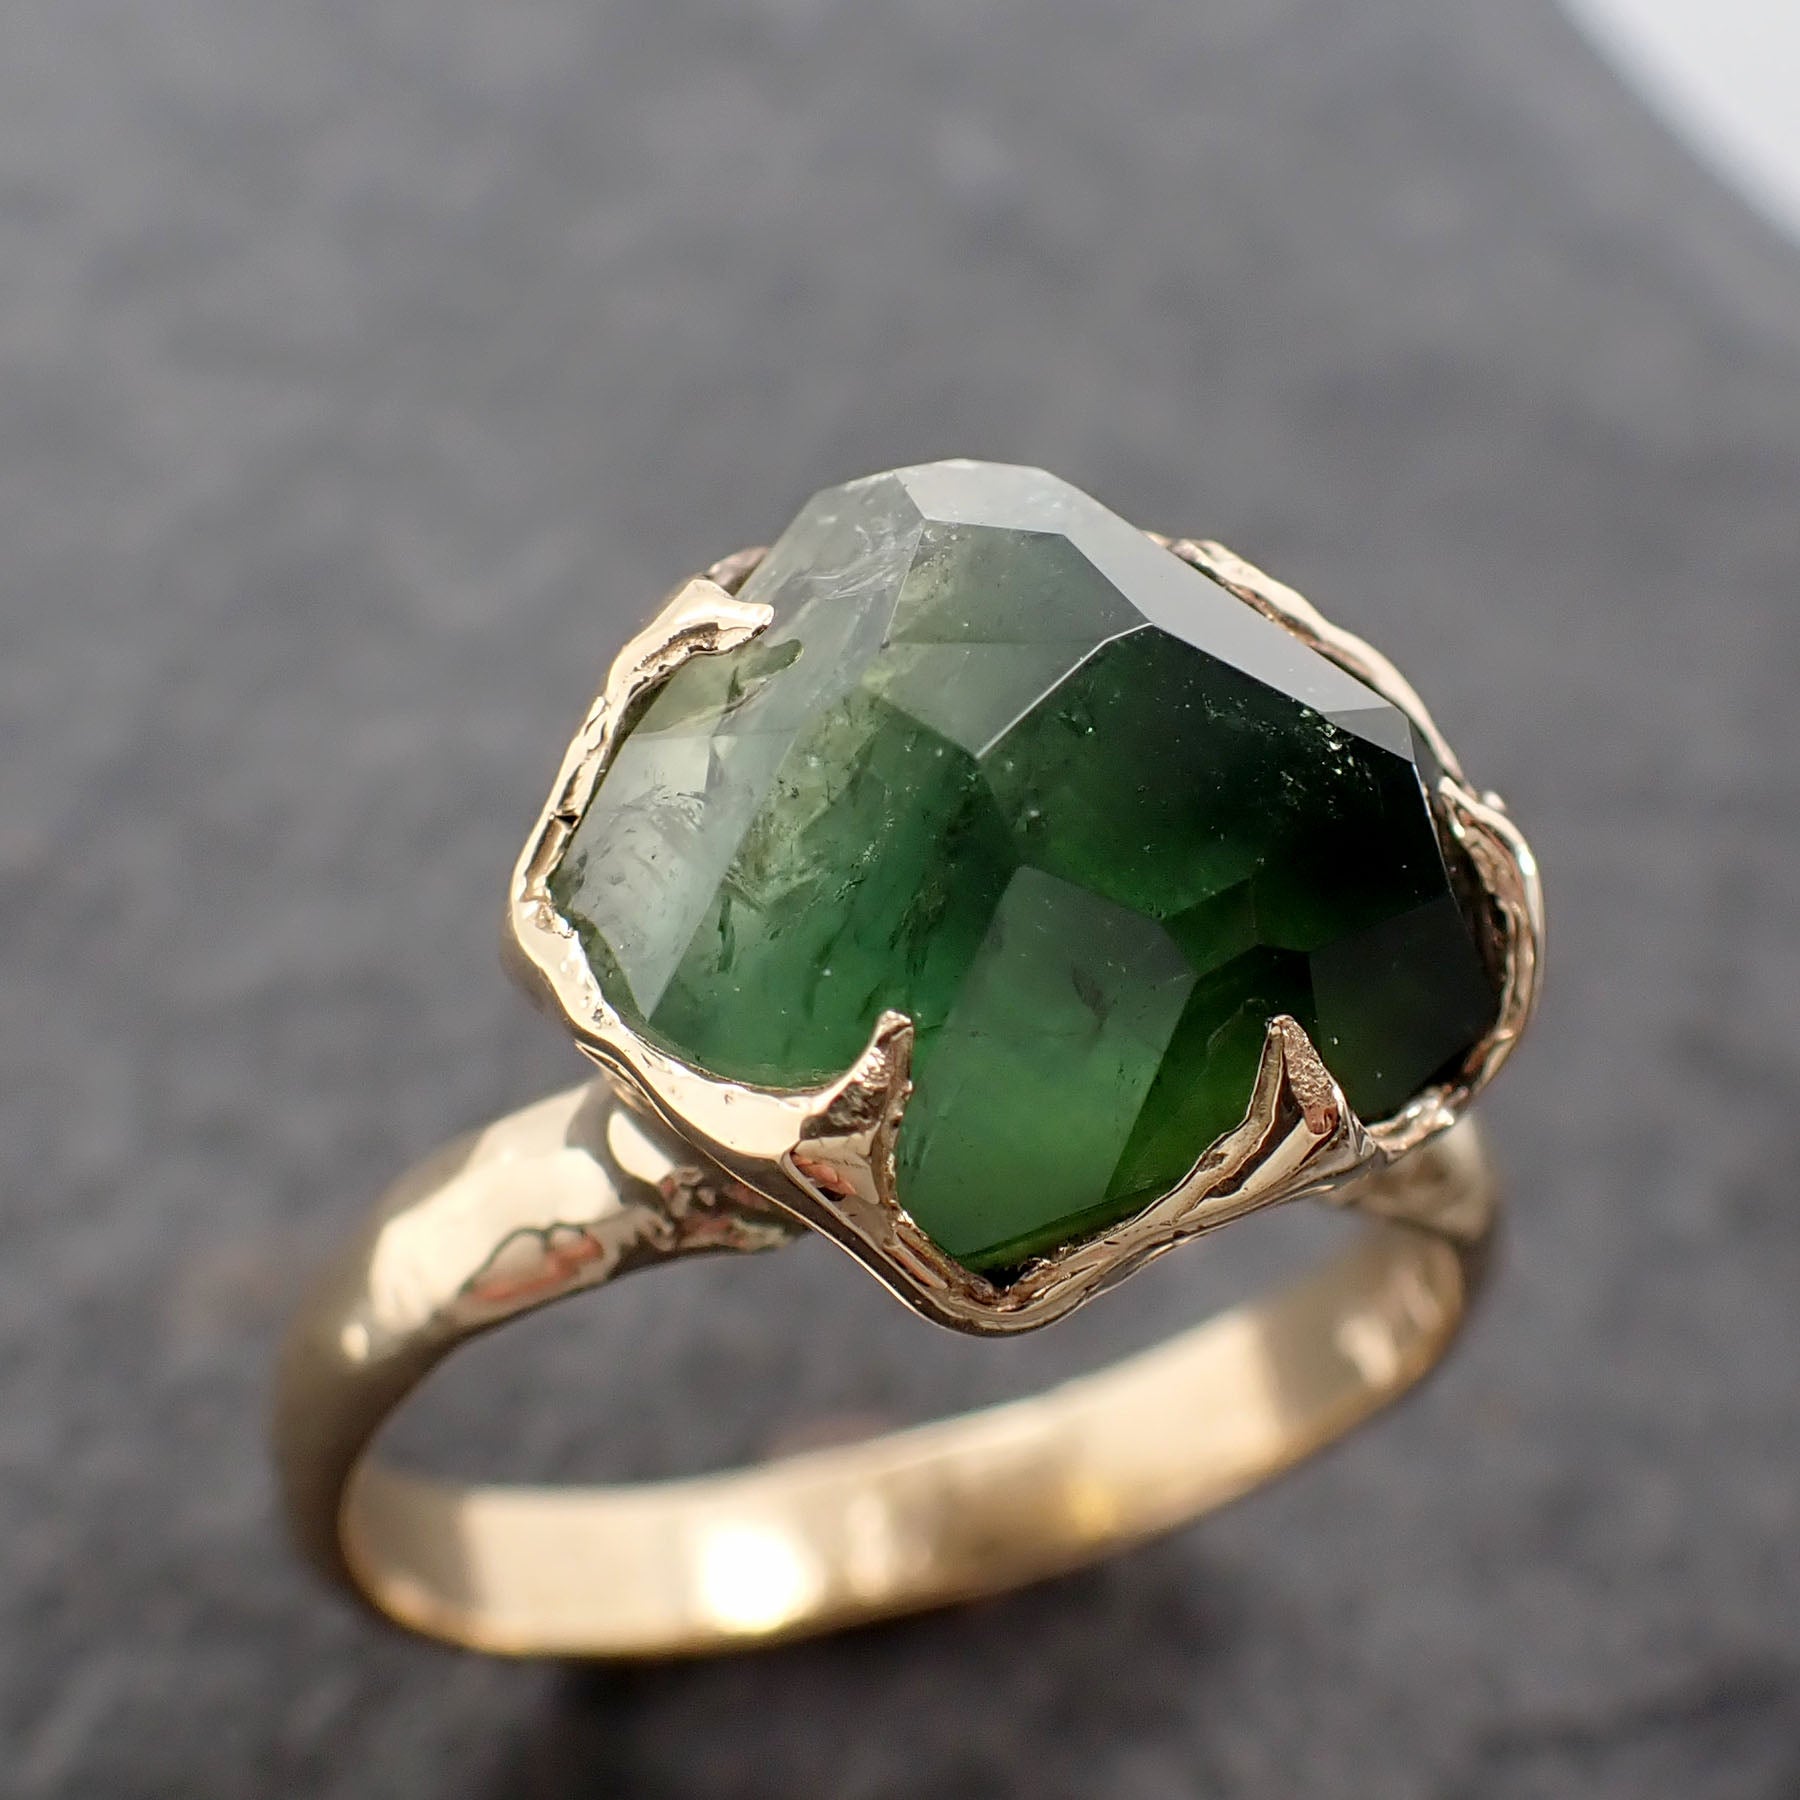 Partially faceted Solitaire Green Tourmaline 18k Yellow Gold Engagement Ring One Of a Kind Gemstone Ring byAngeline 2527